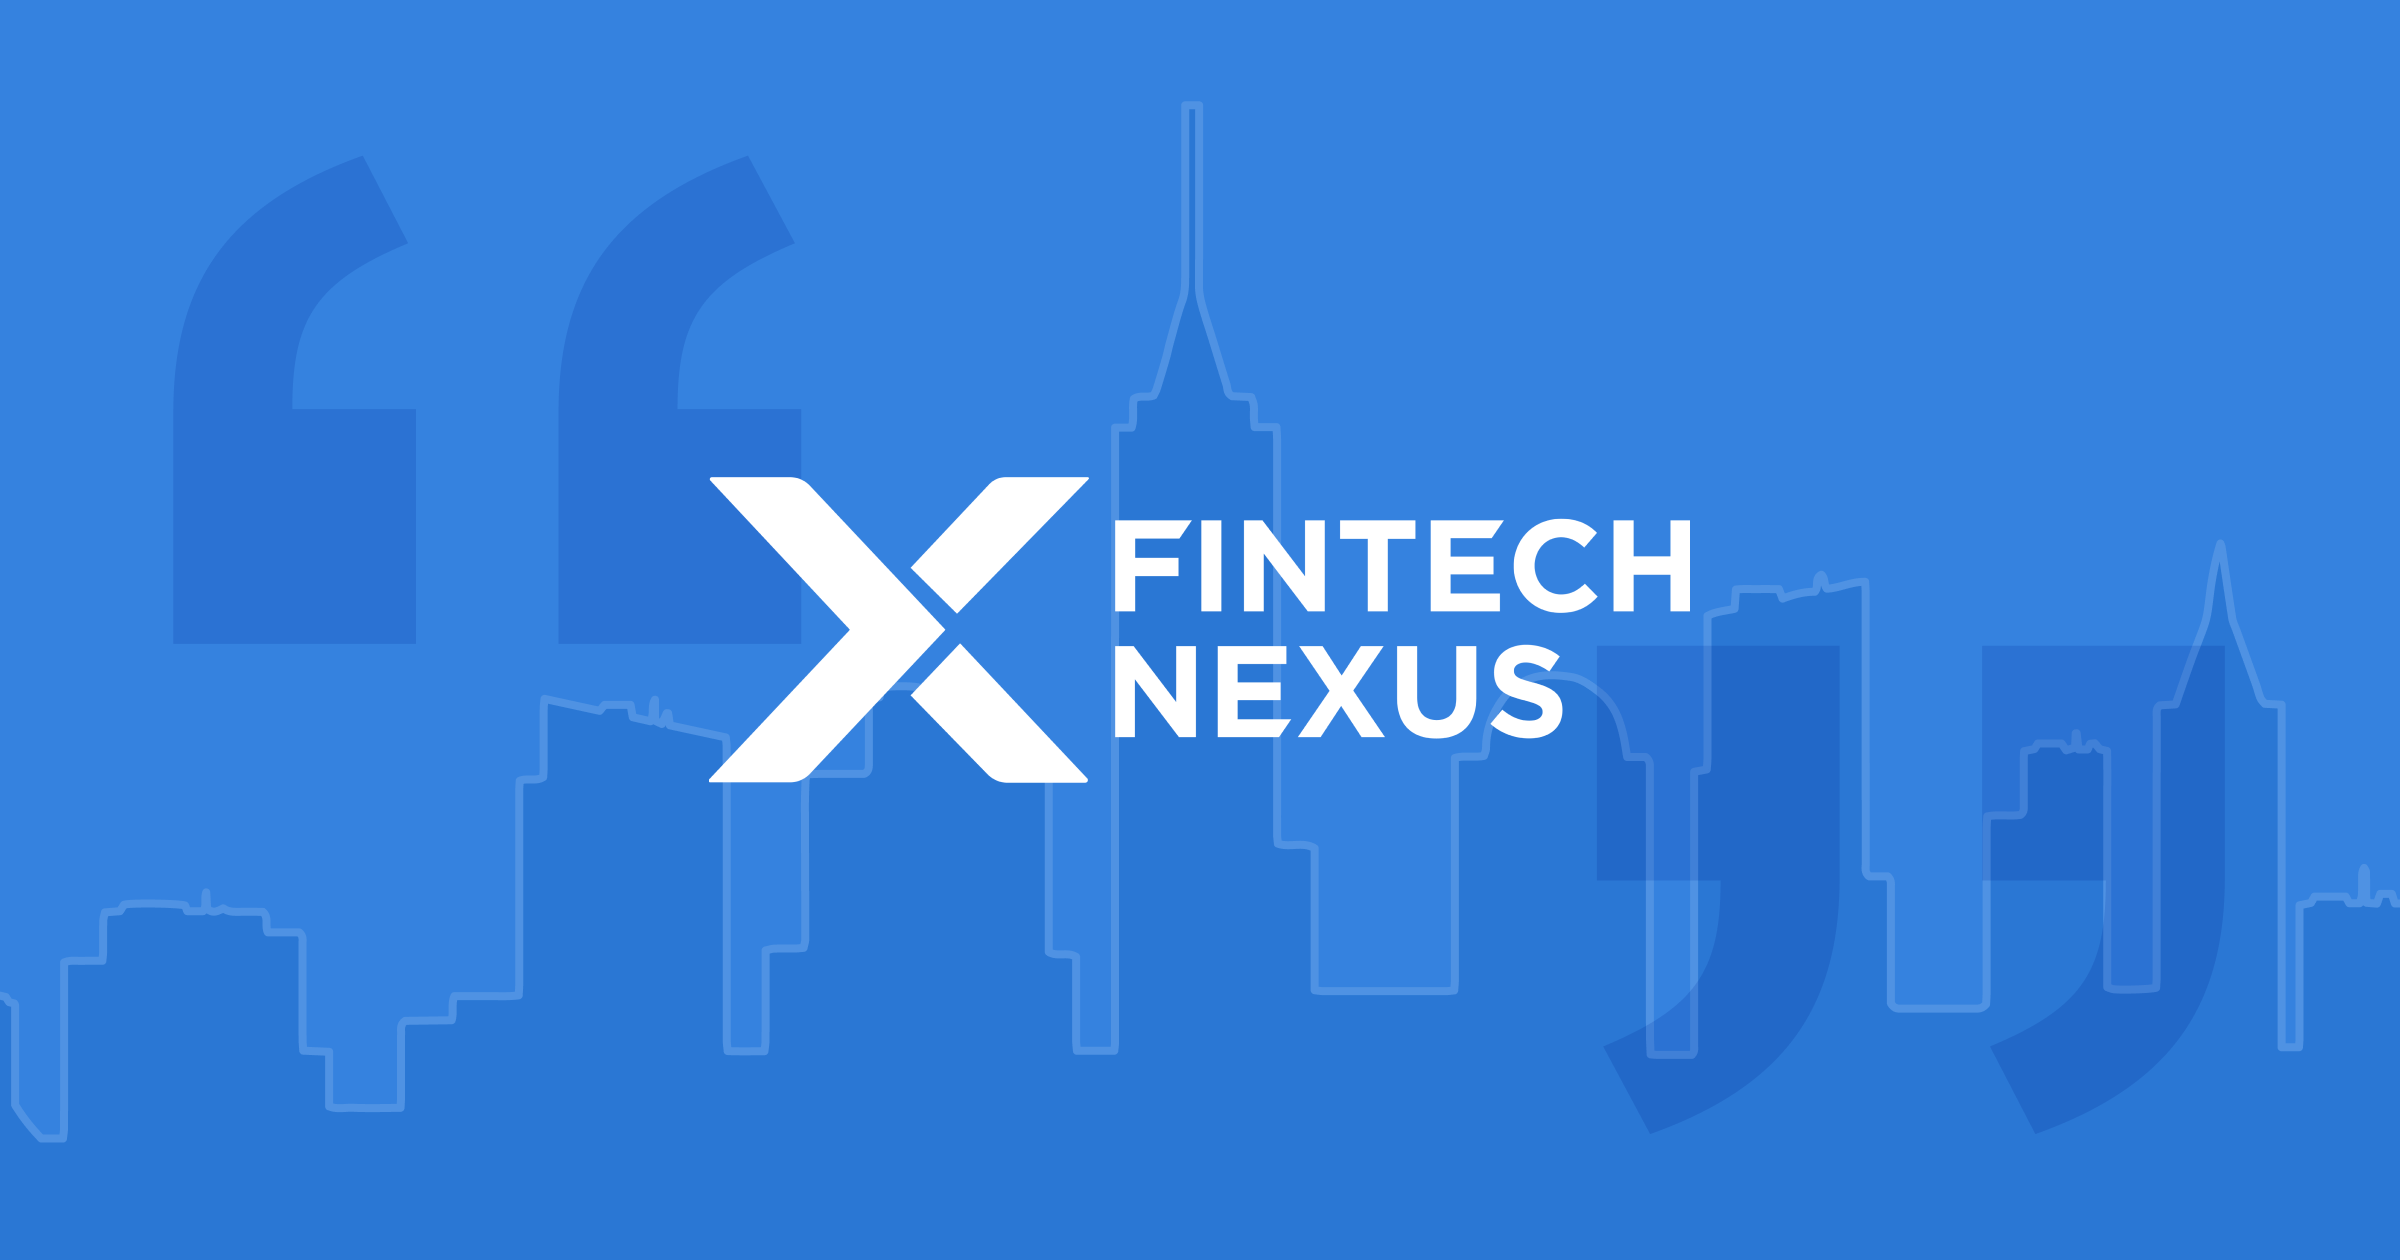 Fintech Nexus logo overlaid on top of background image of NYC skyline and quotation marks